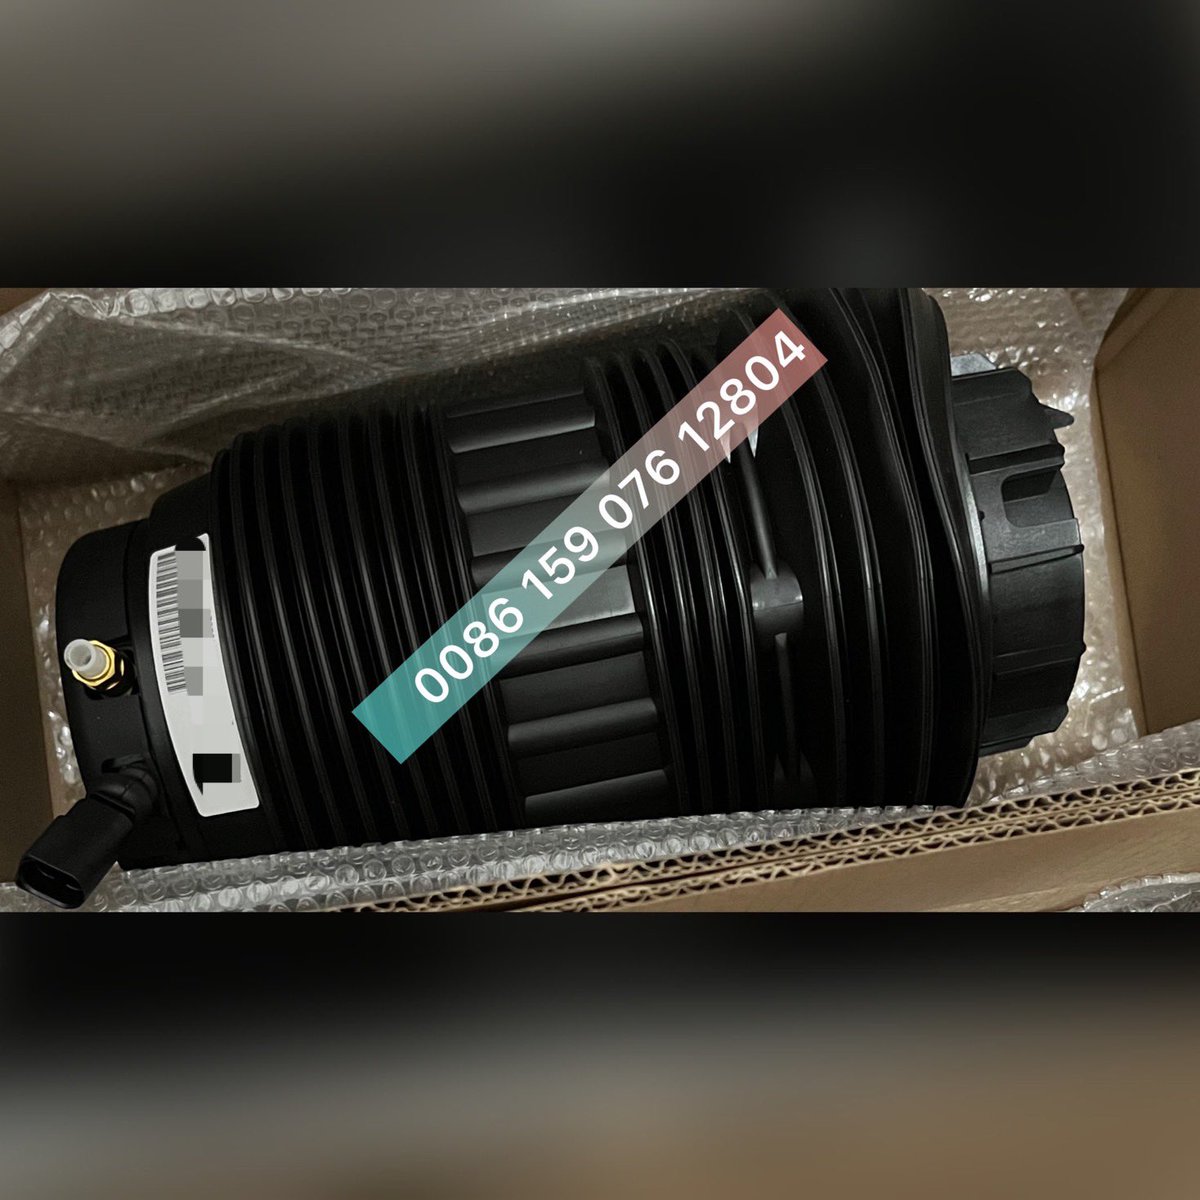 📦🚚Air suspension spring. 
#repairkit #airbags #carspares #airride #pnevmo #airsuspansion #porsche #panameras #970 #oem #hotselling #shockabsorber #bellow #autop #suspension #airmatic #factory #airstrut #price #carparts #rubber #balloon #rubber #hotsales